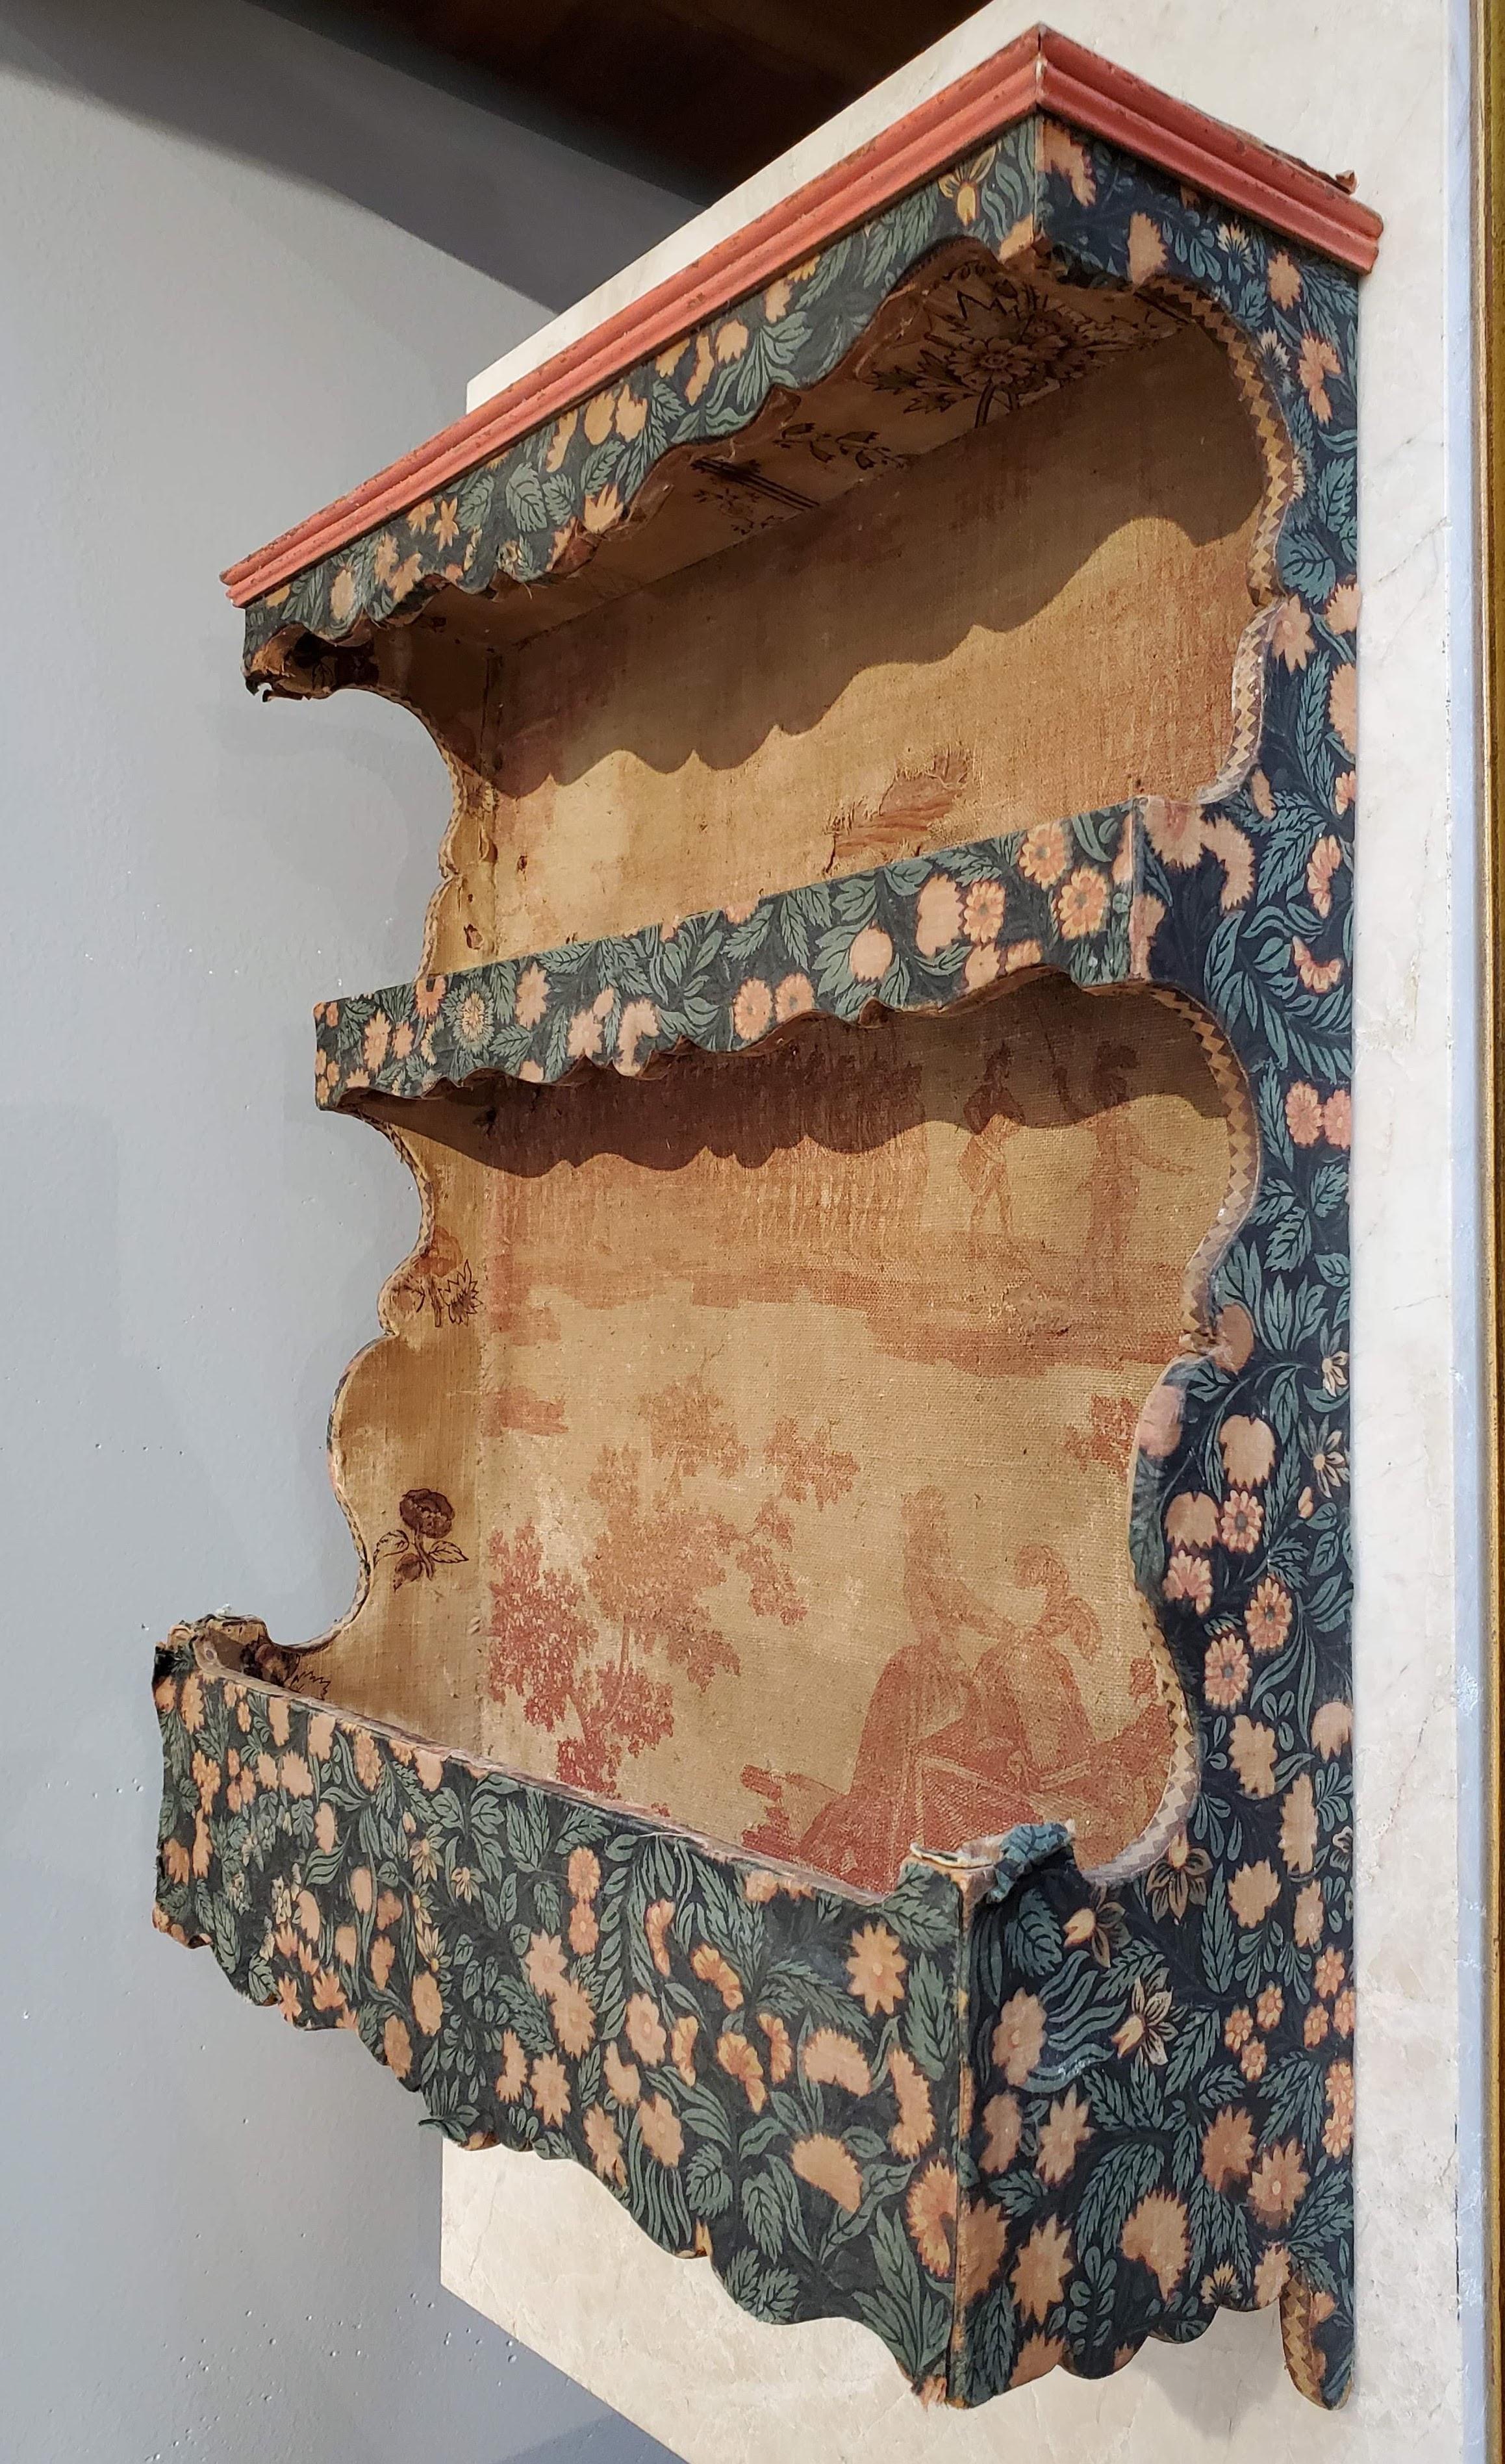 Small 19th century French Provincial spice rack with shaped cornice and sides and two shelves all covered in early 19th century toile fabric.

Provence, circa 1850.

Measures: 16